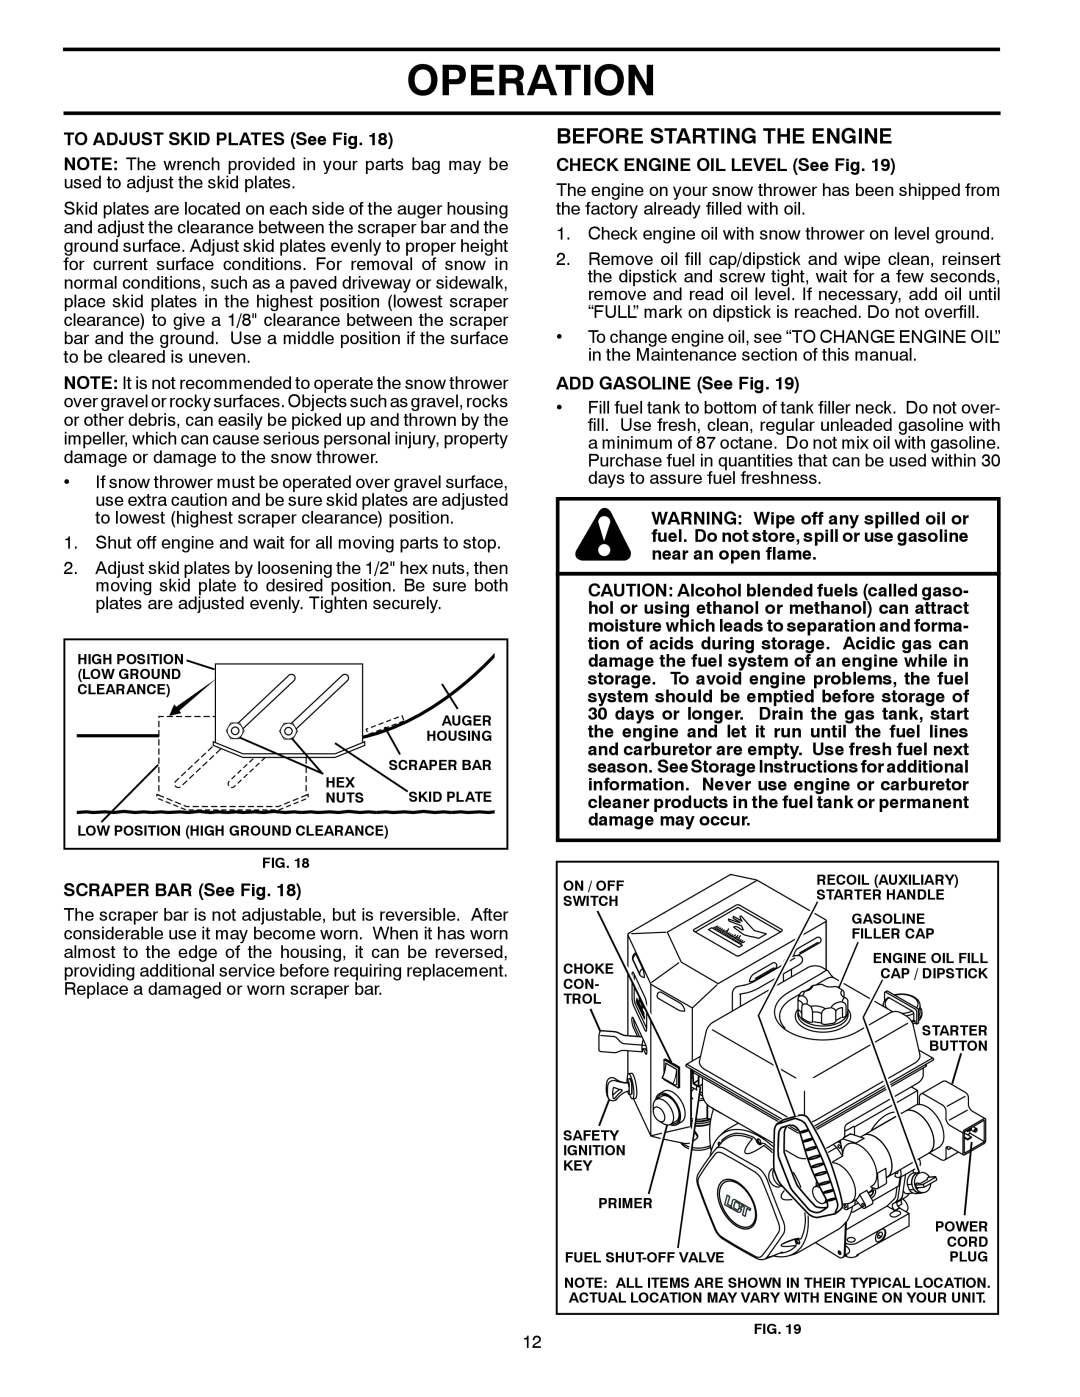 Poulan 435560, 961940009 Before Starting The Engine, Operation, TO ADJUST SKID PLATES See Fig, SCRAPER BAR See Fig 